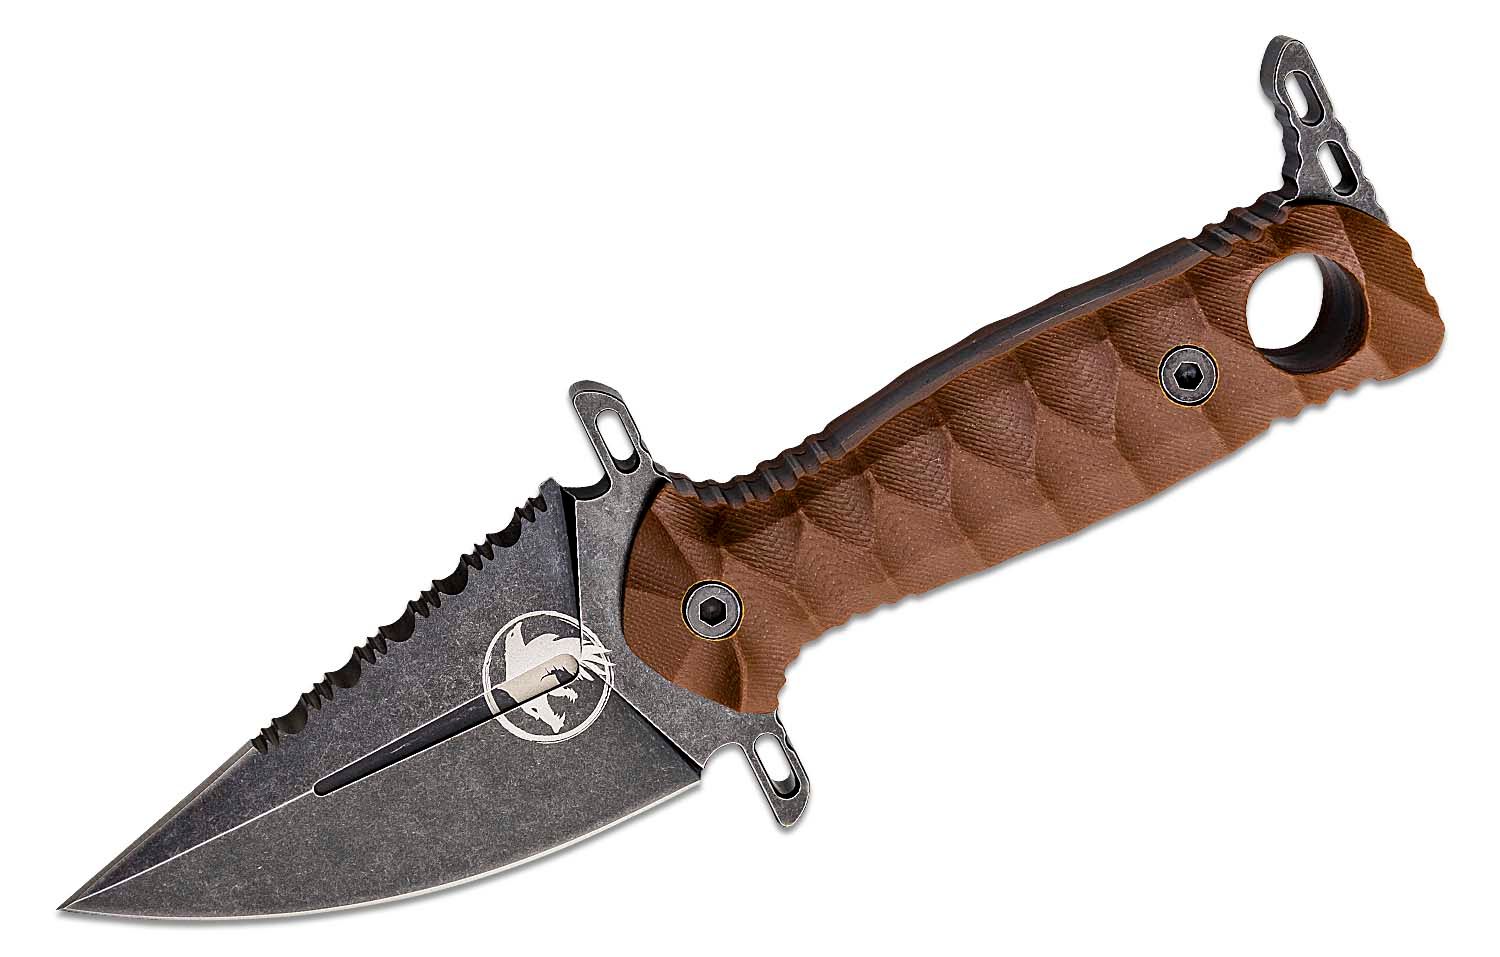  UMF Fixed Blade Knives with Sheath large Hunting